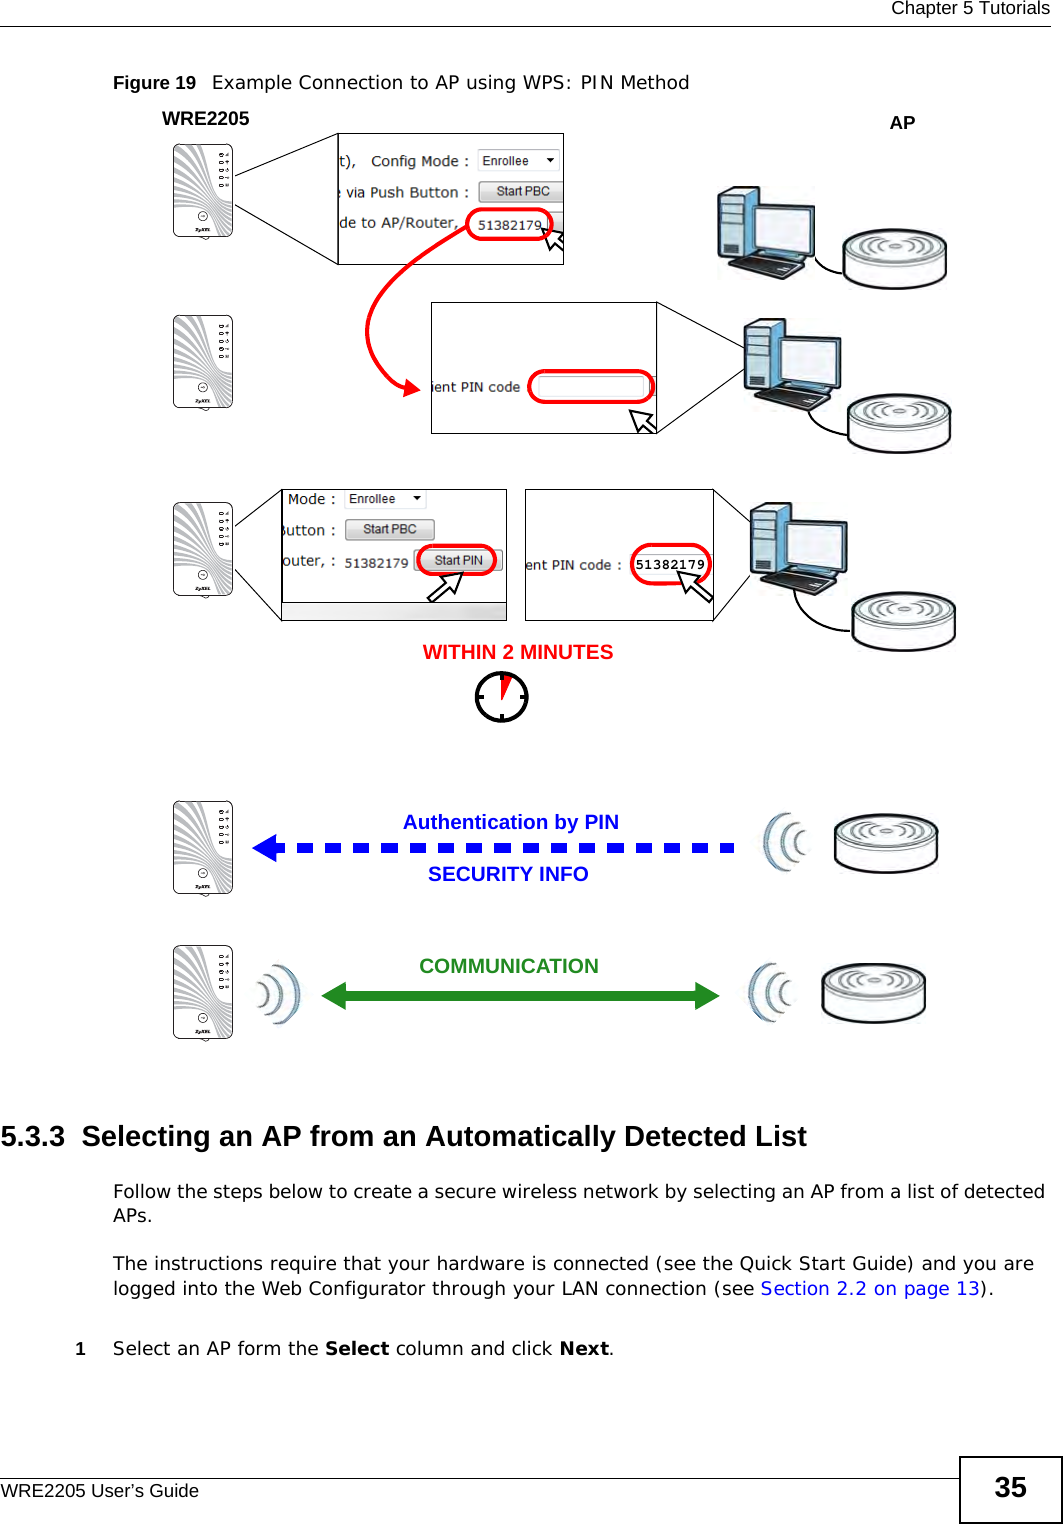  Chapter 5 TutorialsWRE2205 User’s Guide 35Figure 19   Example Connection to AP using WPS: PIN Method5.3.3  Selecting an AP from an Automatically Detected ListFollow the steps below to create a secure wireless network by selecting an AP from a list of detected APs.The instructions require that your hardware is connected (see the Quick Start Guide) and you are logged into the Web Configurator through your LAN connection (see Section 2.2 on page 13).1Select an AP form the Select column and click Next.Authentication by PINSECURITY INFOWITHIN 2 MINUTESAPWRE2205COMMUNICATION51382179